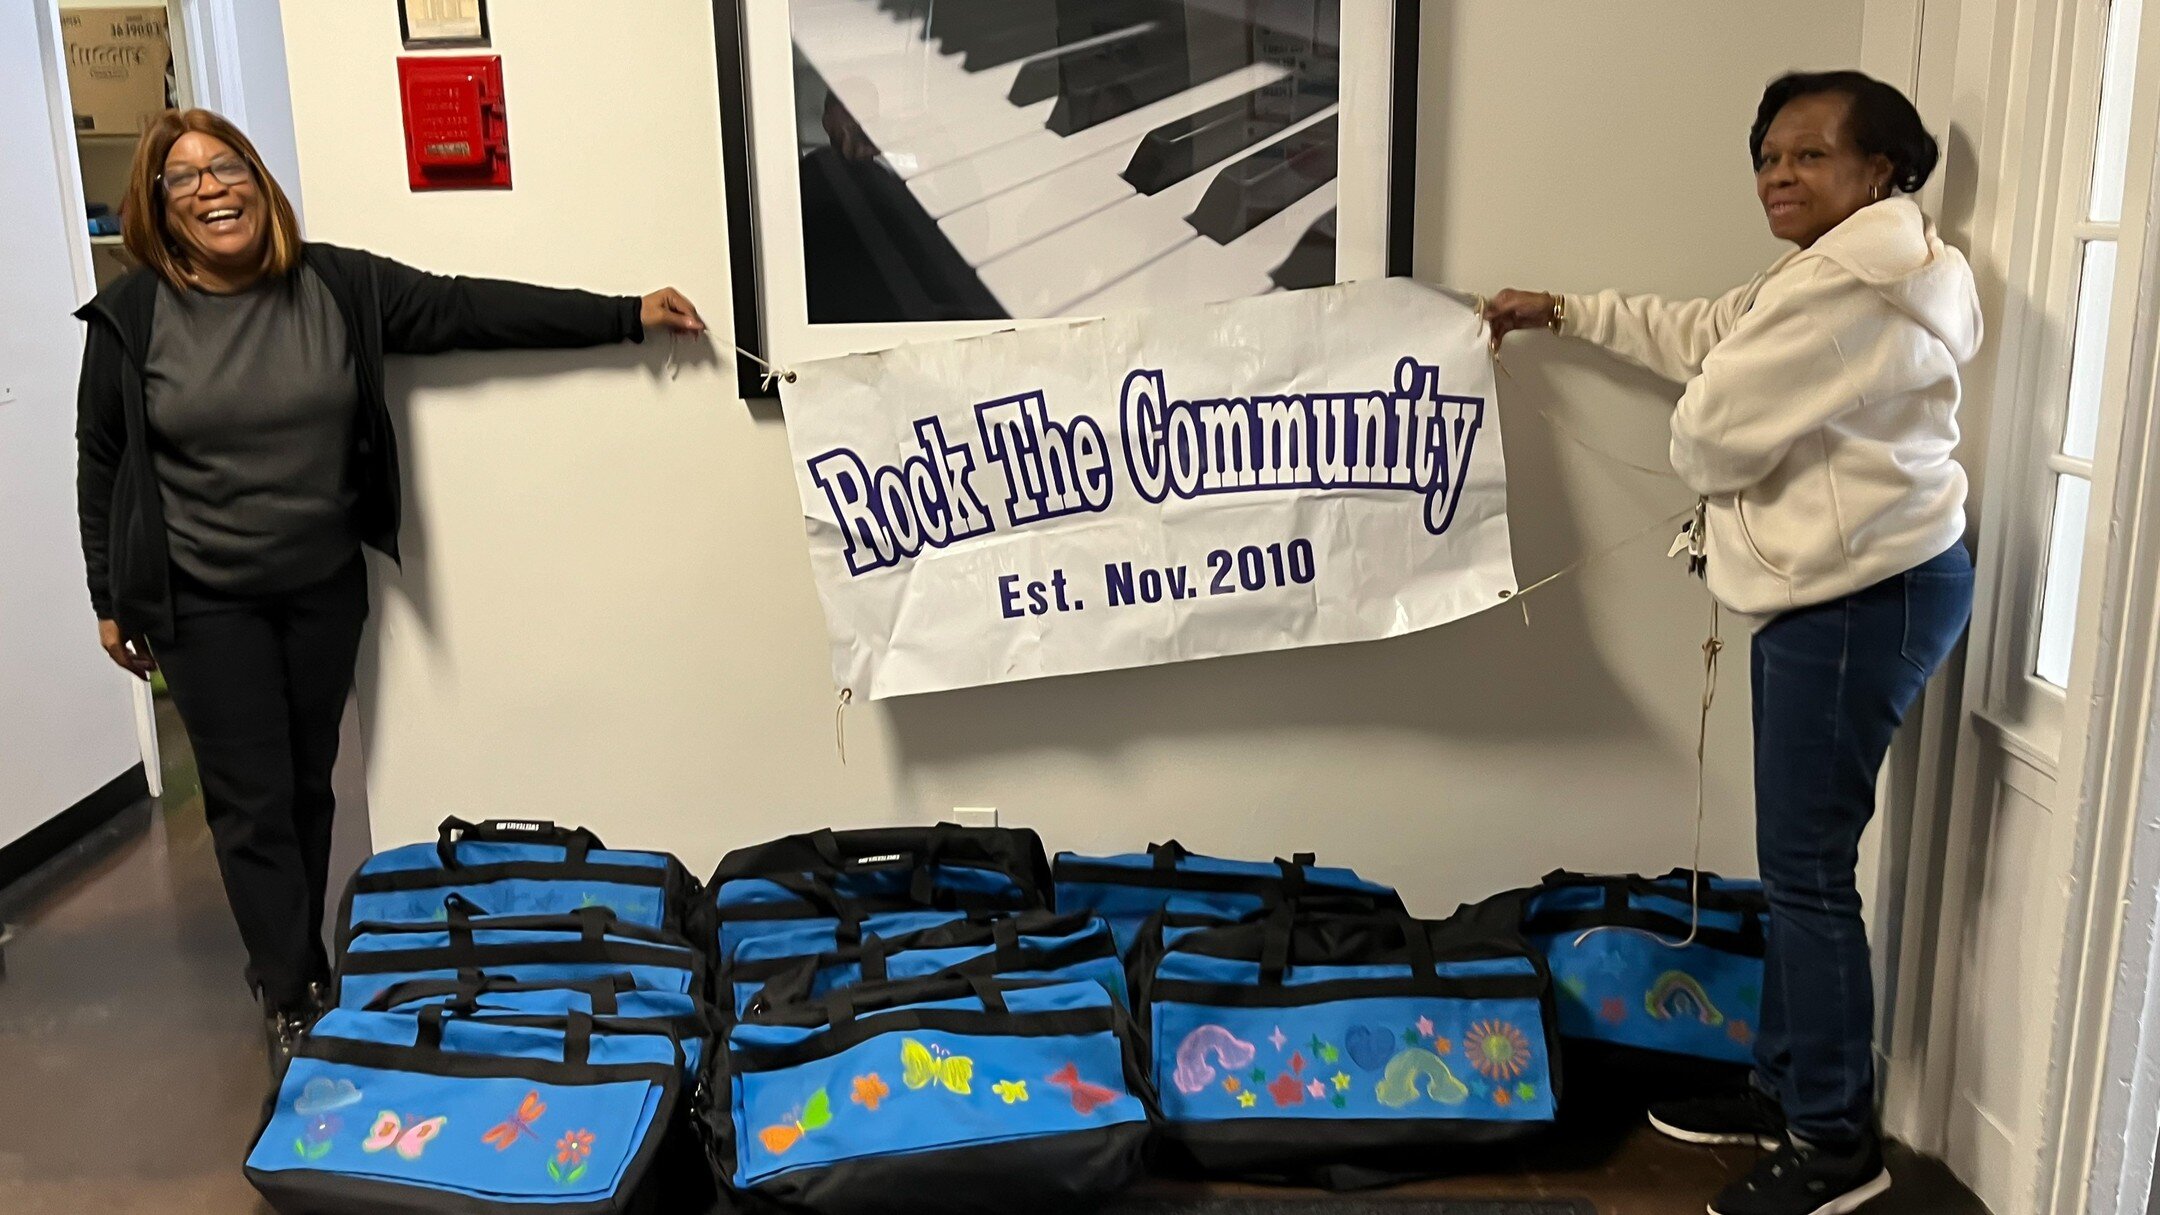 A local organization, Rock The Community, donated hand-decorated duffle bags filled with necessities for our foster children on the move. Thank you for helping children in need!
#queens #communitysupport #thankful